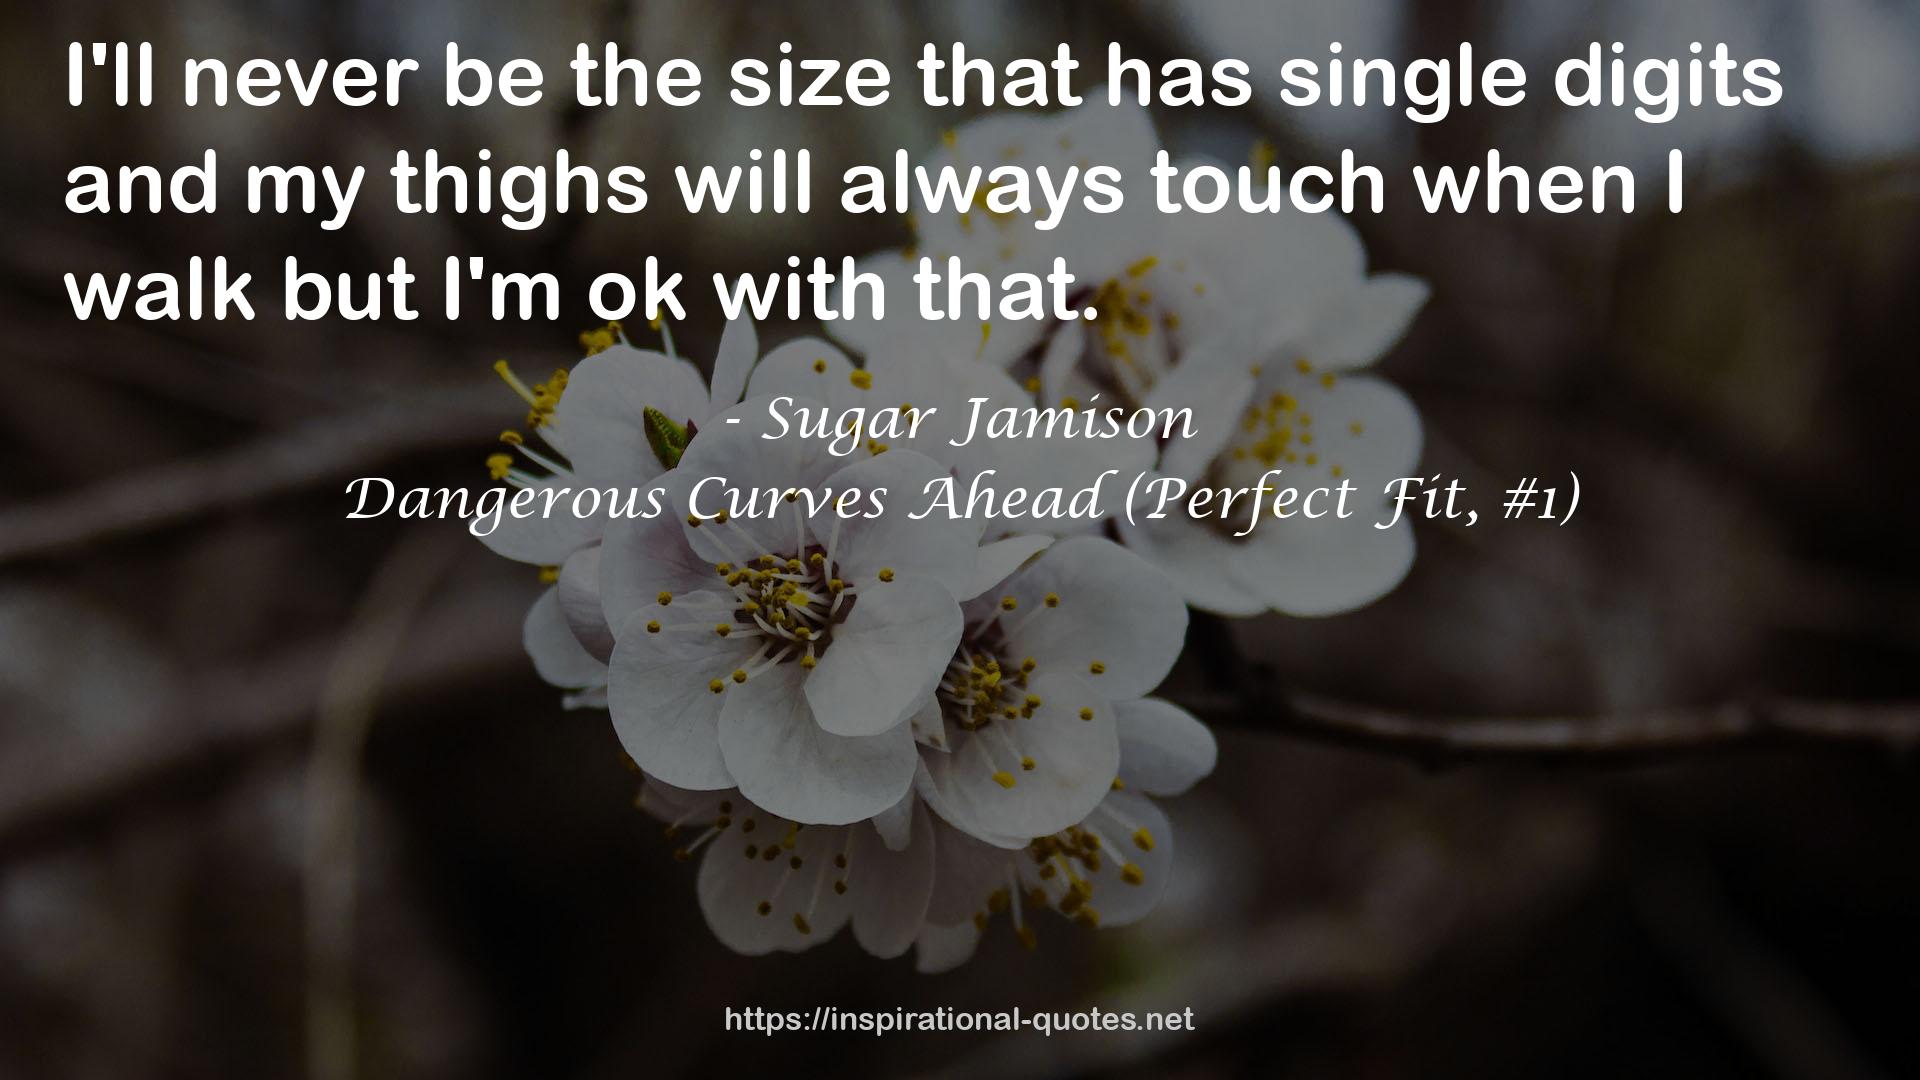 Dangerous Curves Ahead (Perfect Fit, #1) QUOTES